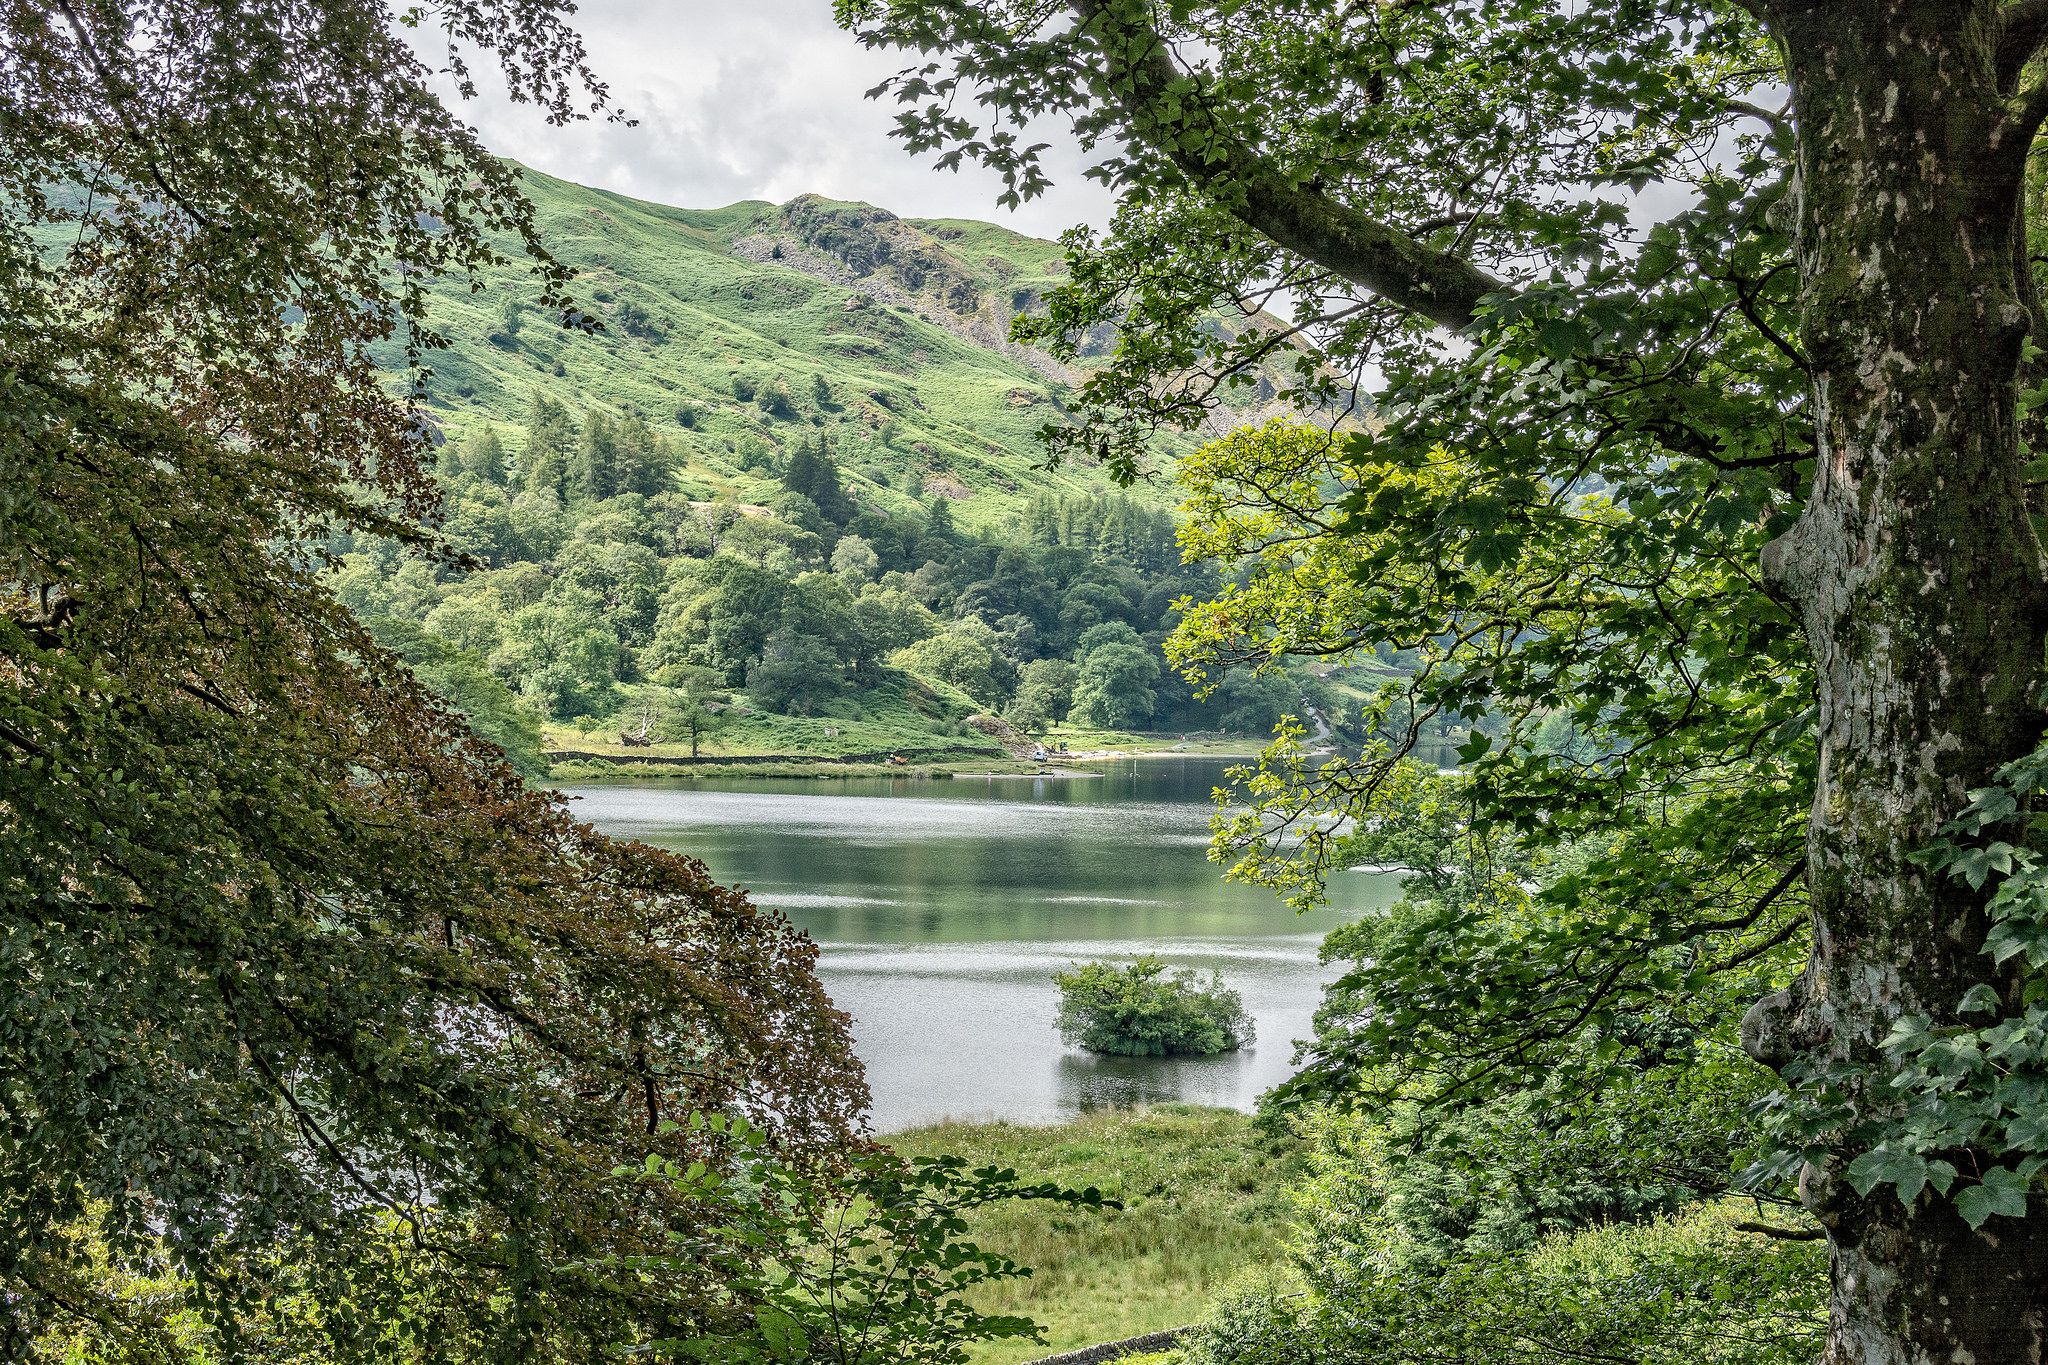 Rydal Water from the garden at Rydal Mount / CC 2.0 David Nicholls